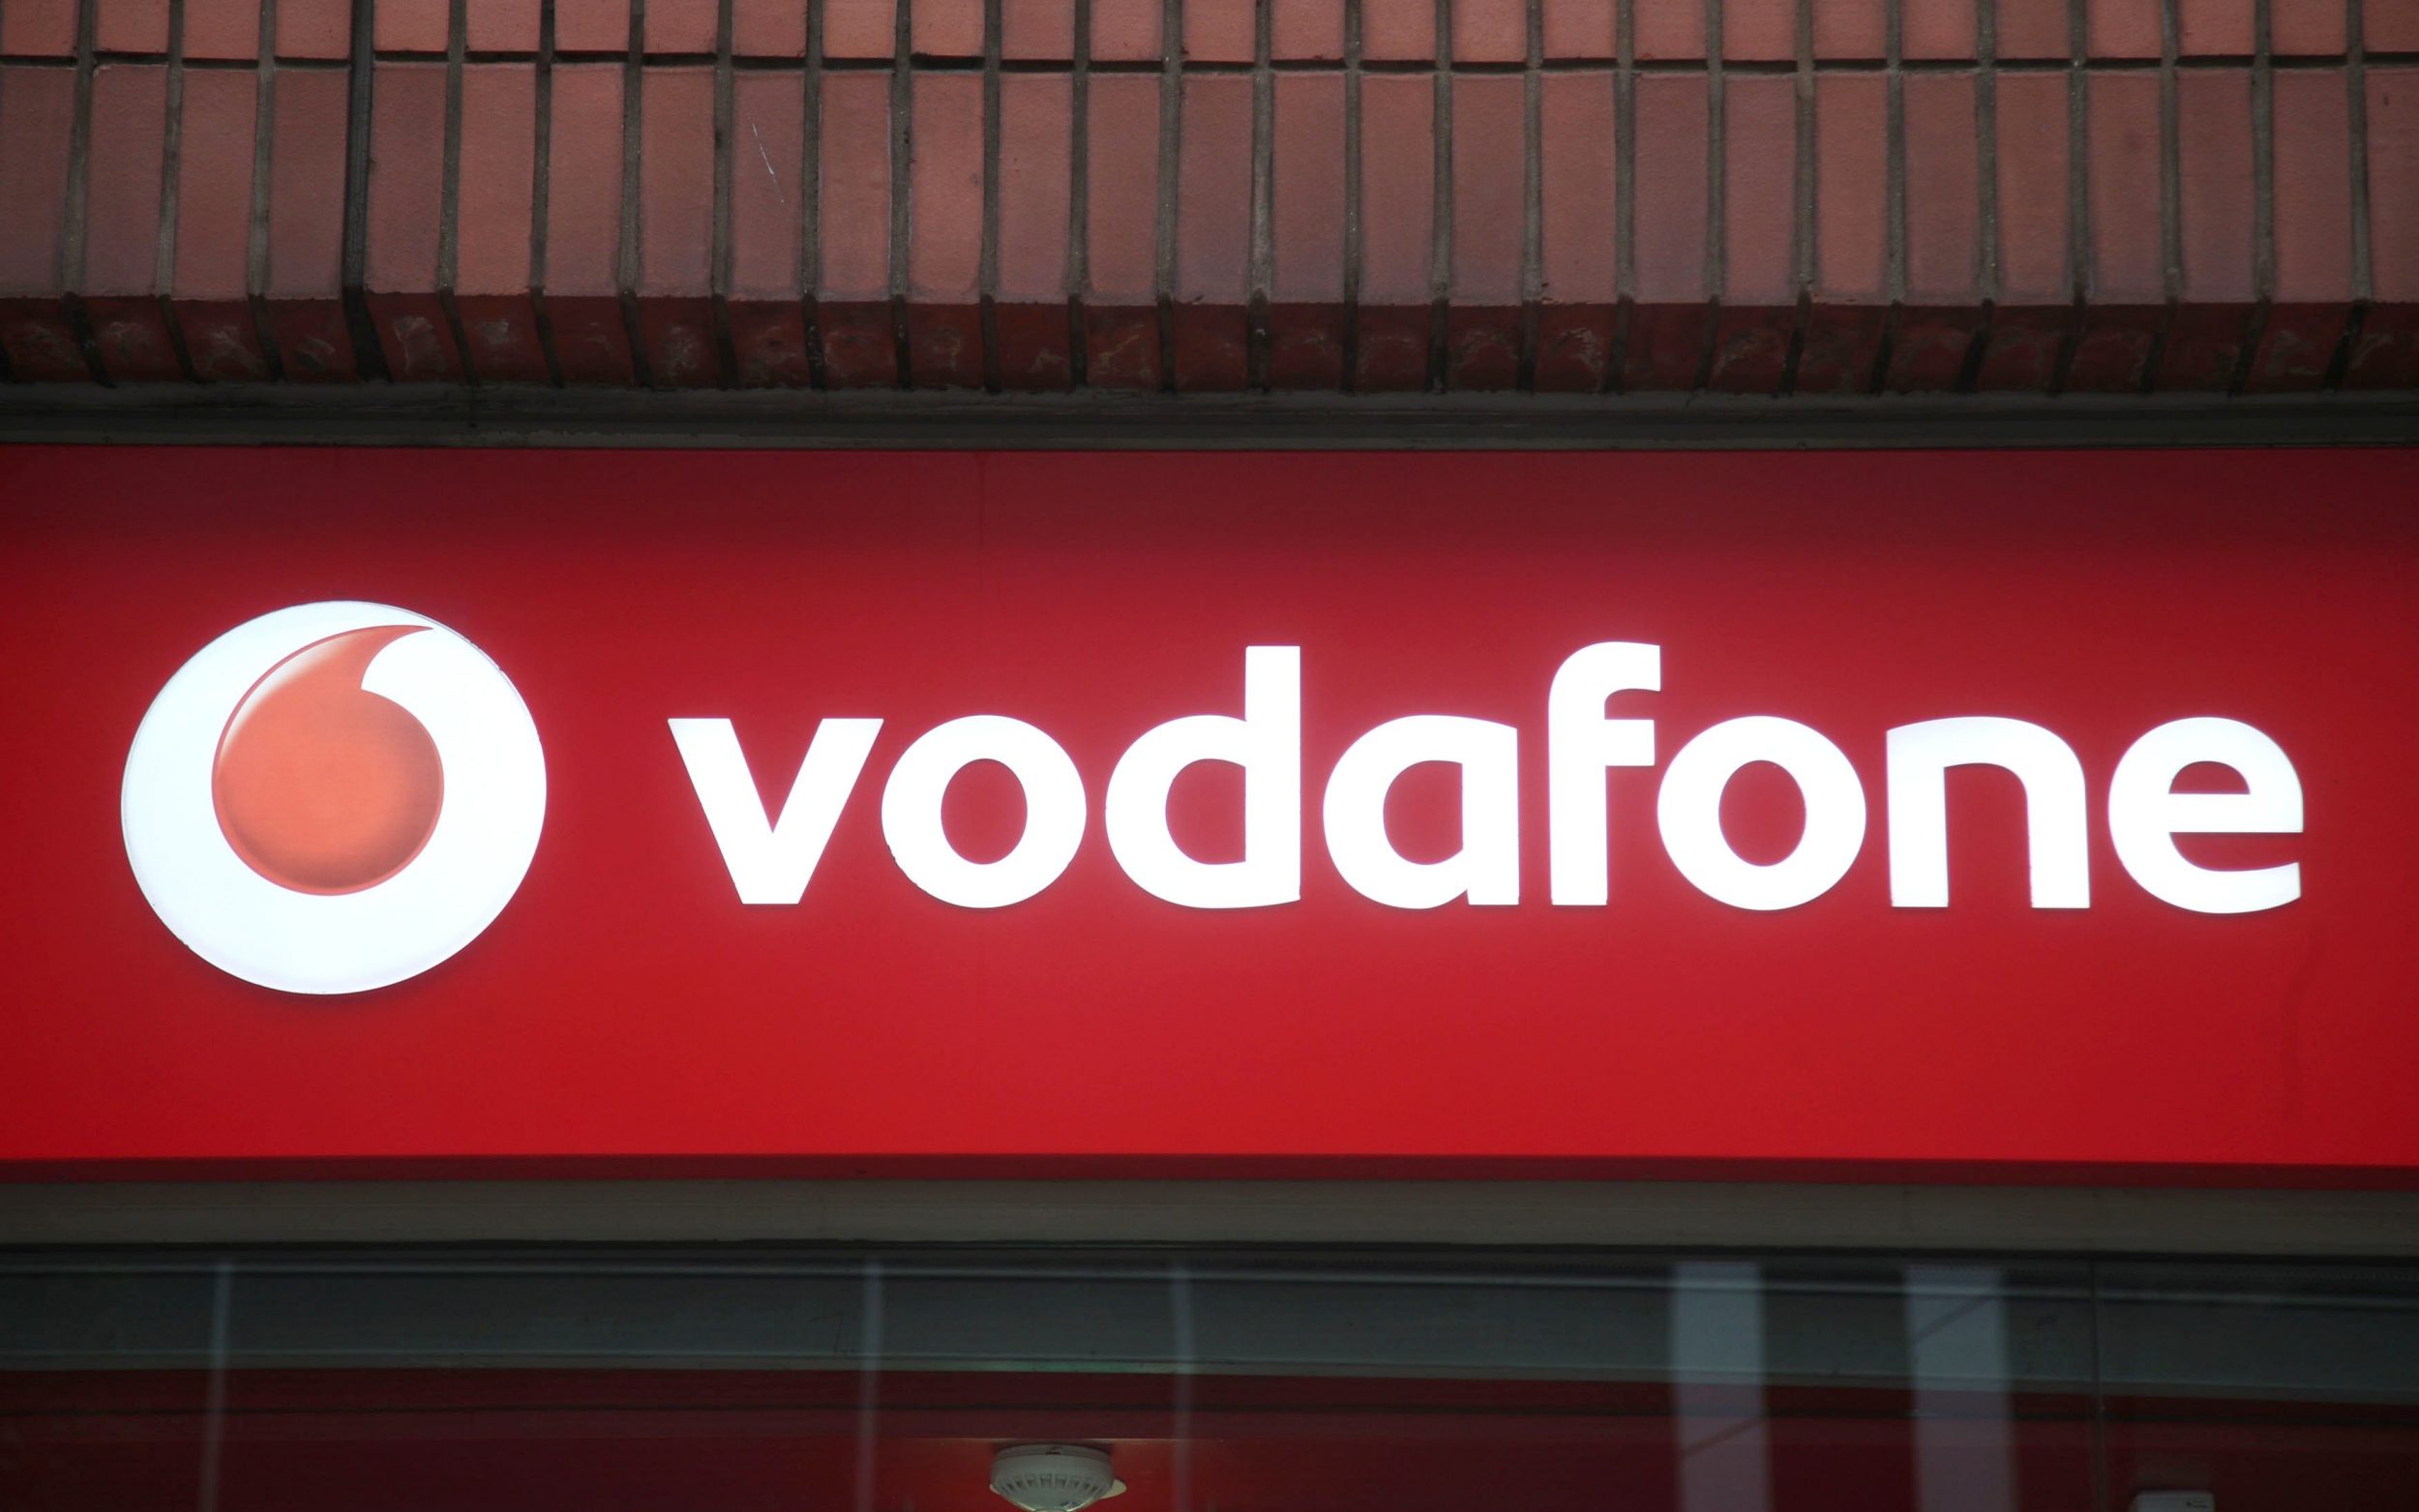 vodafone pays out more than $1bn in advisory fees since 2000